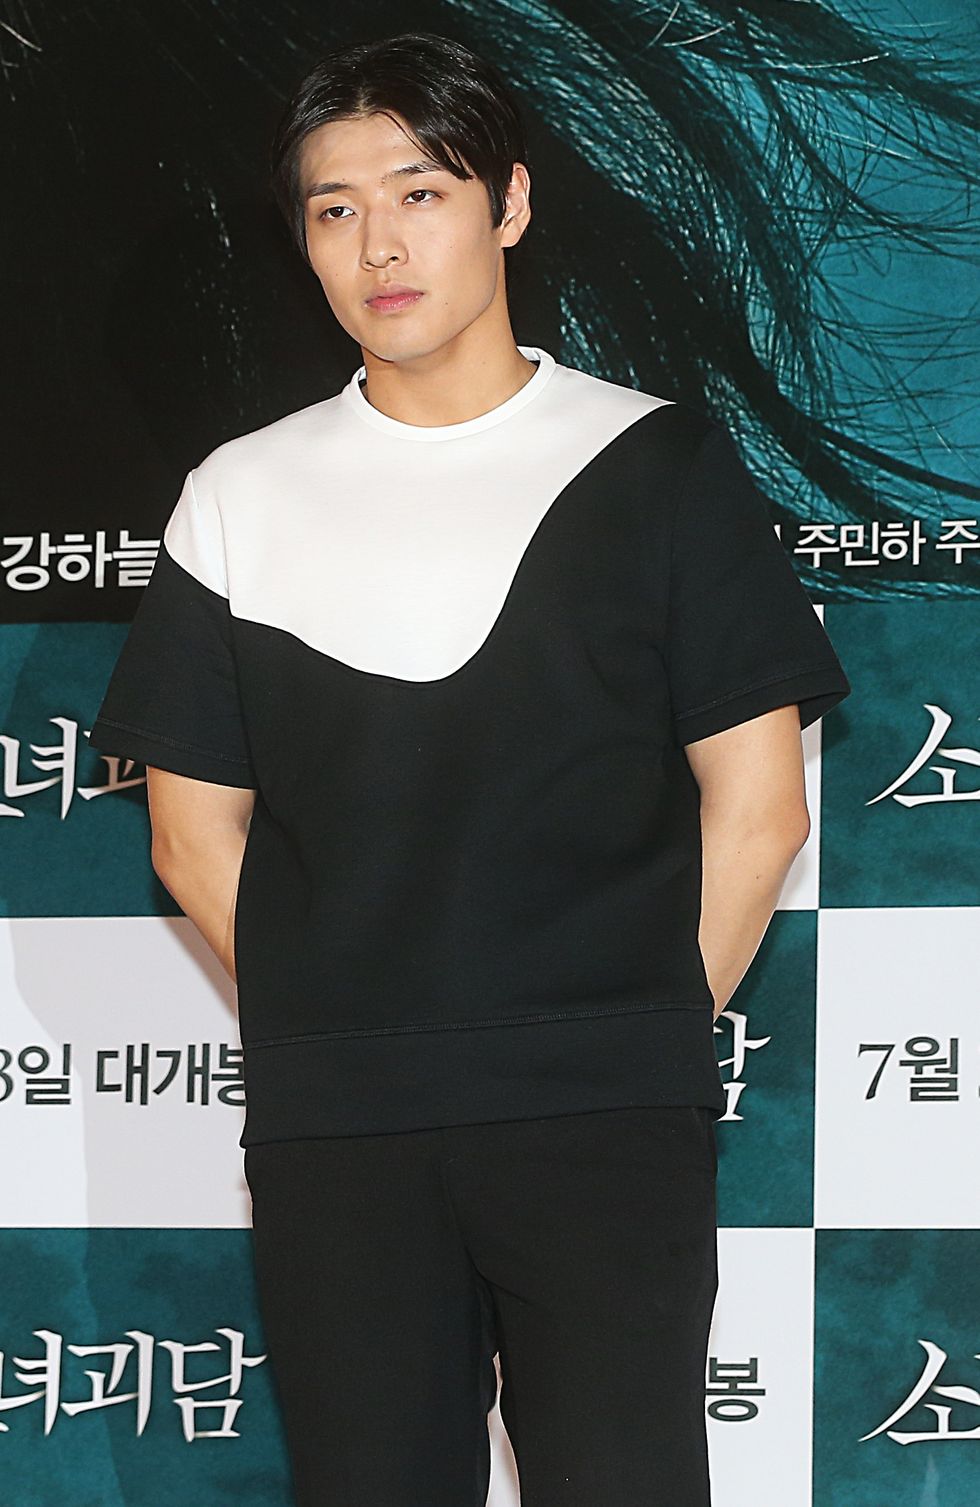 s korean actor kang ha neul 
south korean actor kang ha neul, who stars in the new movie "mourning grave," poses for a photo during a publicity event in seoul on june 19, 2014 the movie will appear on south korean screens starting on july 3 yonhap2014 06 19 171557
copyright ⓒ 1980 2014 yonhapnews agency all rights reserved